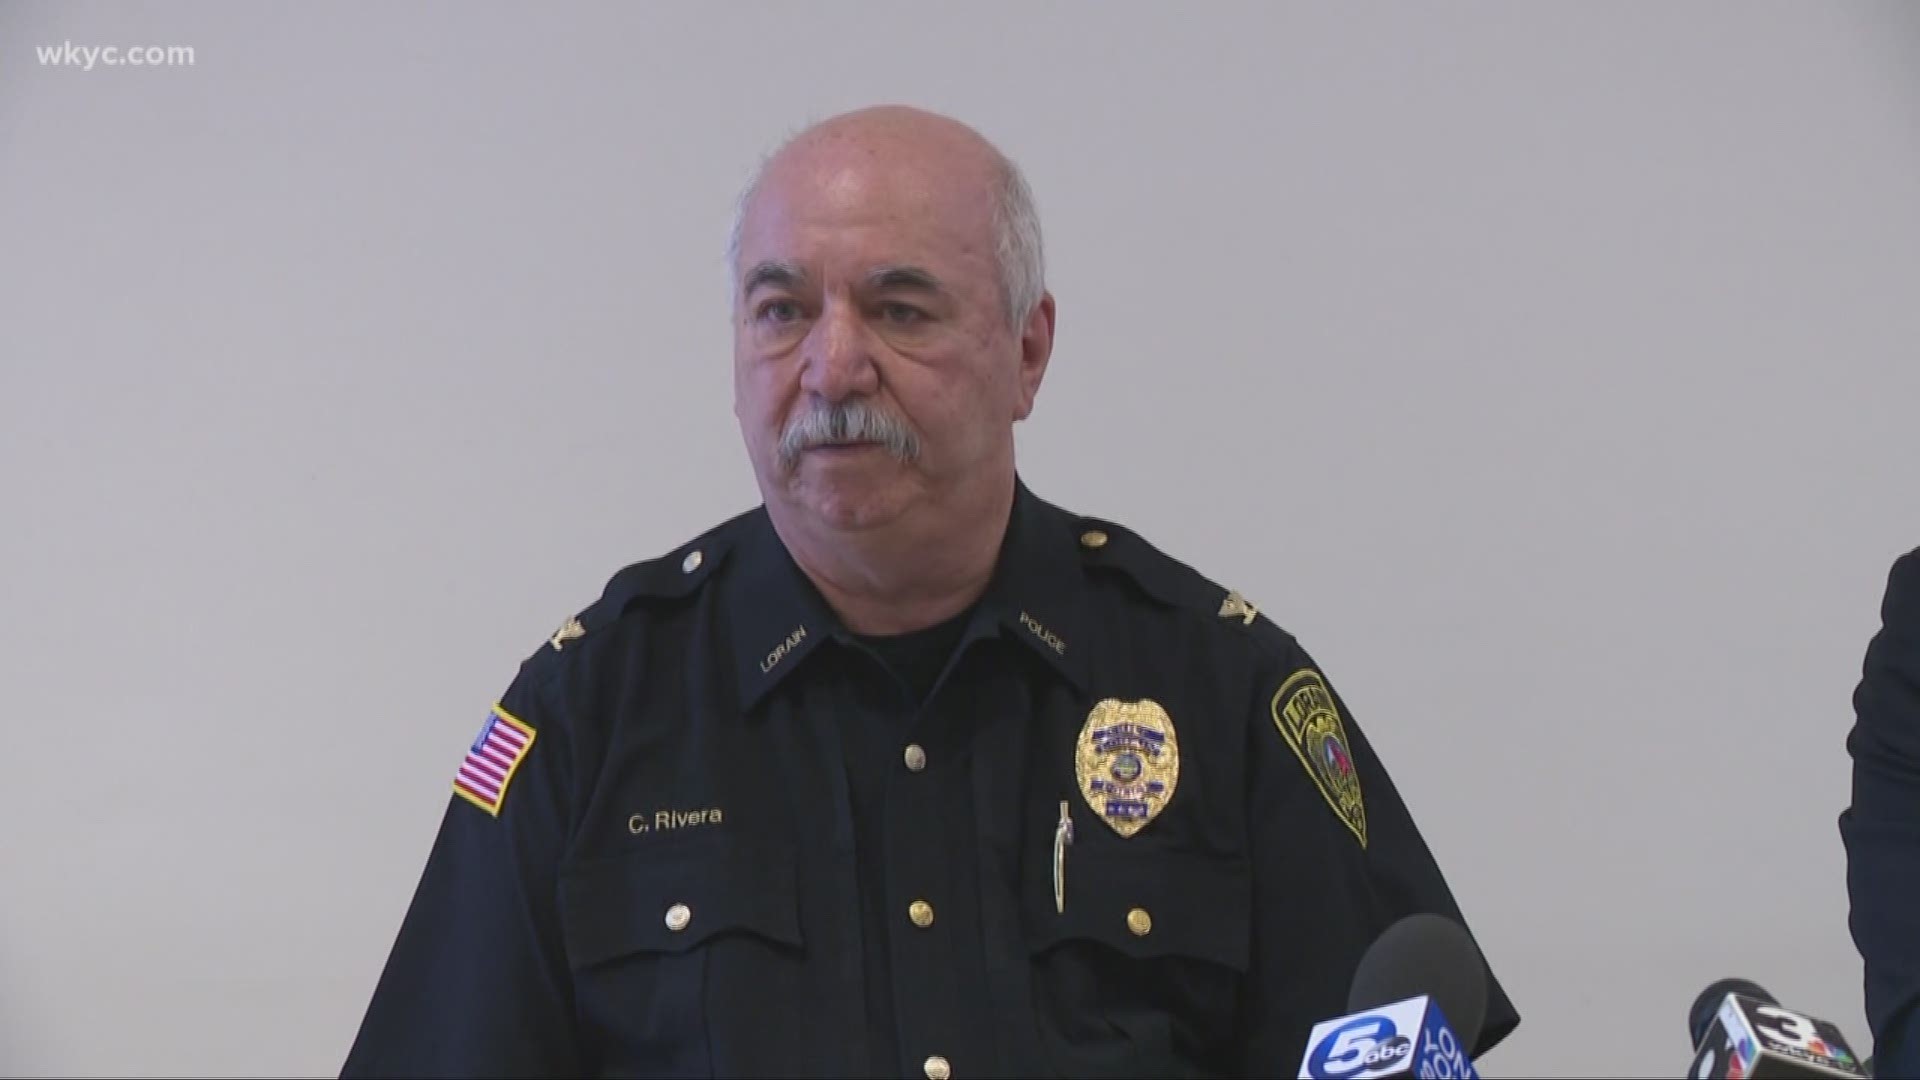 On the same day that Lorain Mayor Chase Ritenauer resigned, longtime Lorain Police Chief Cel Rivera announced his retirement